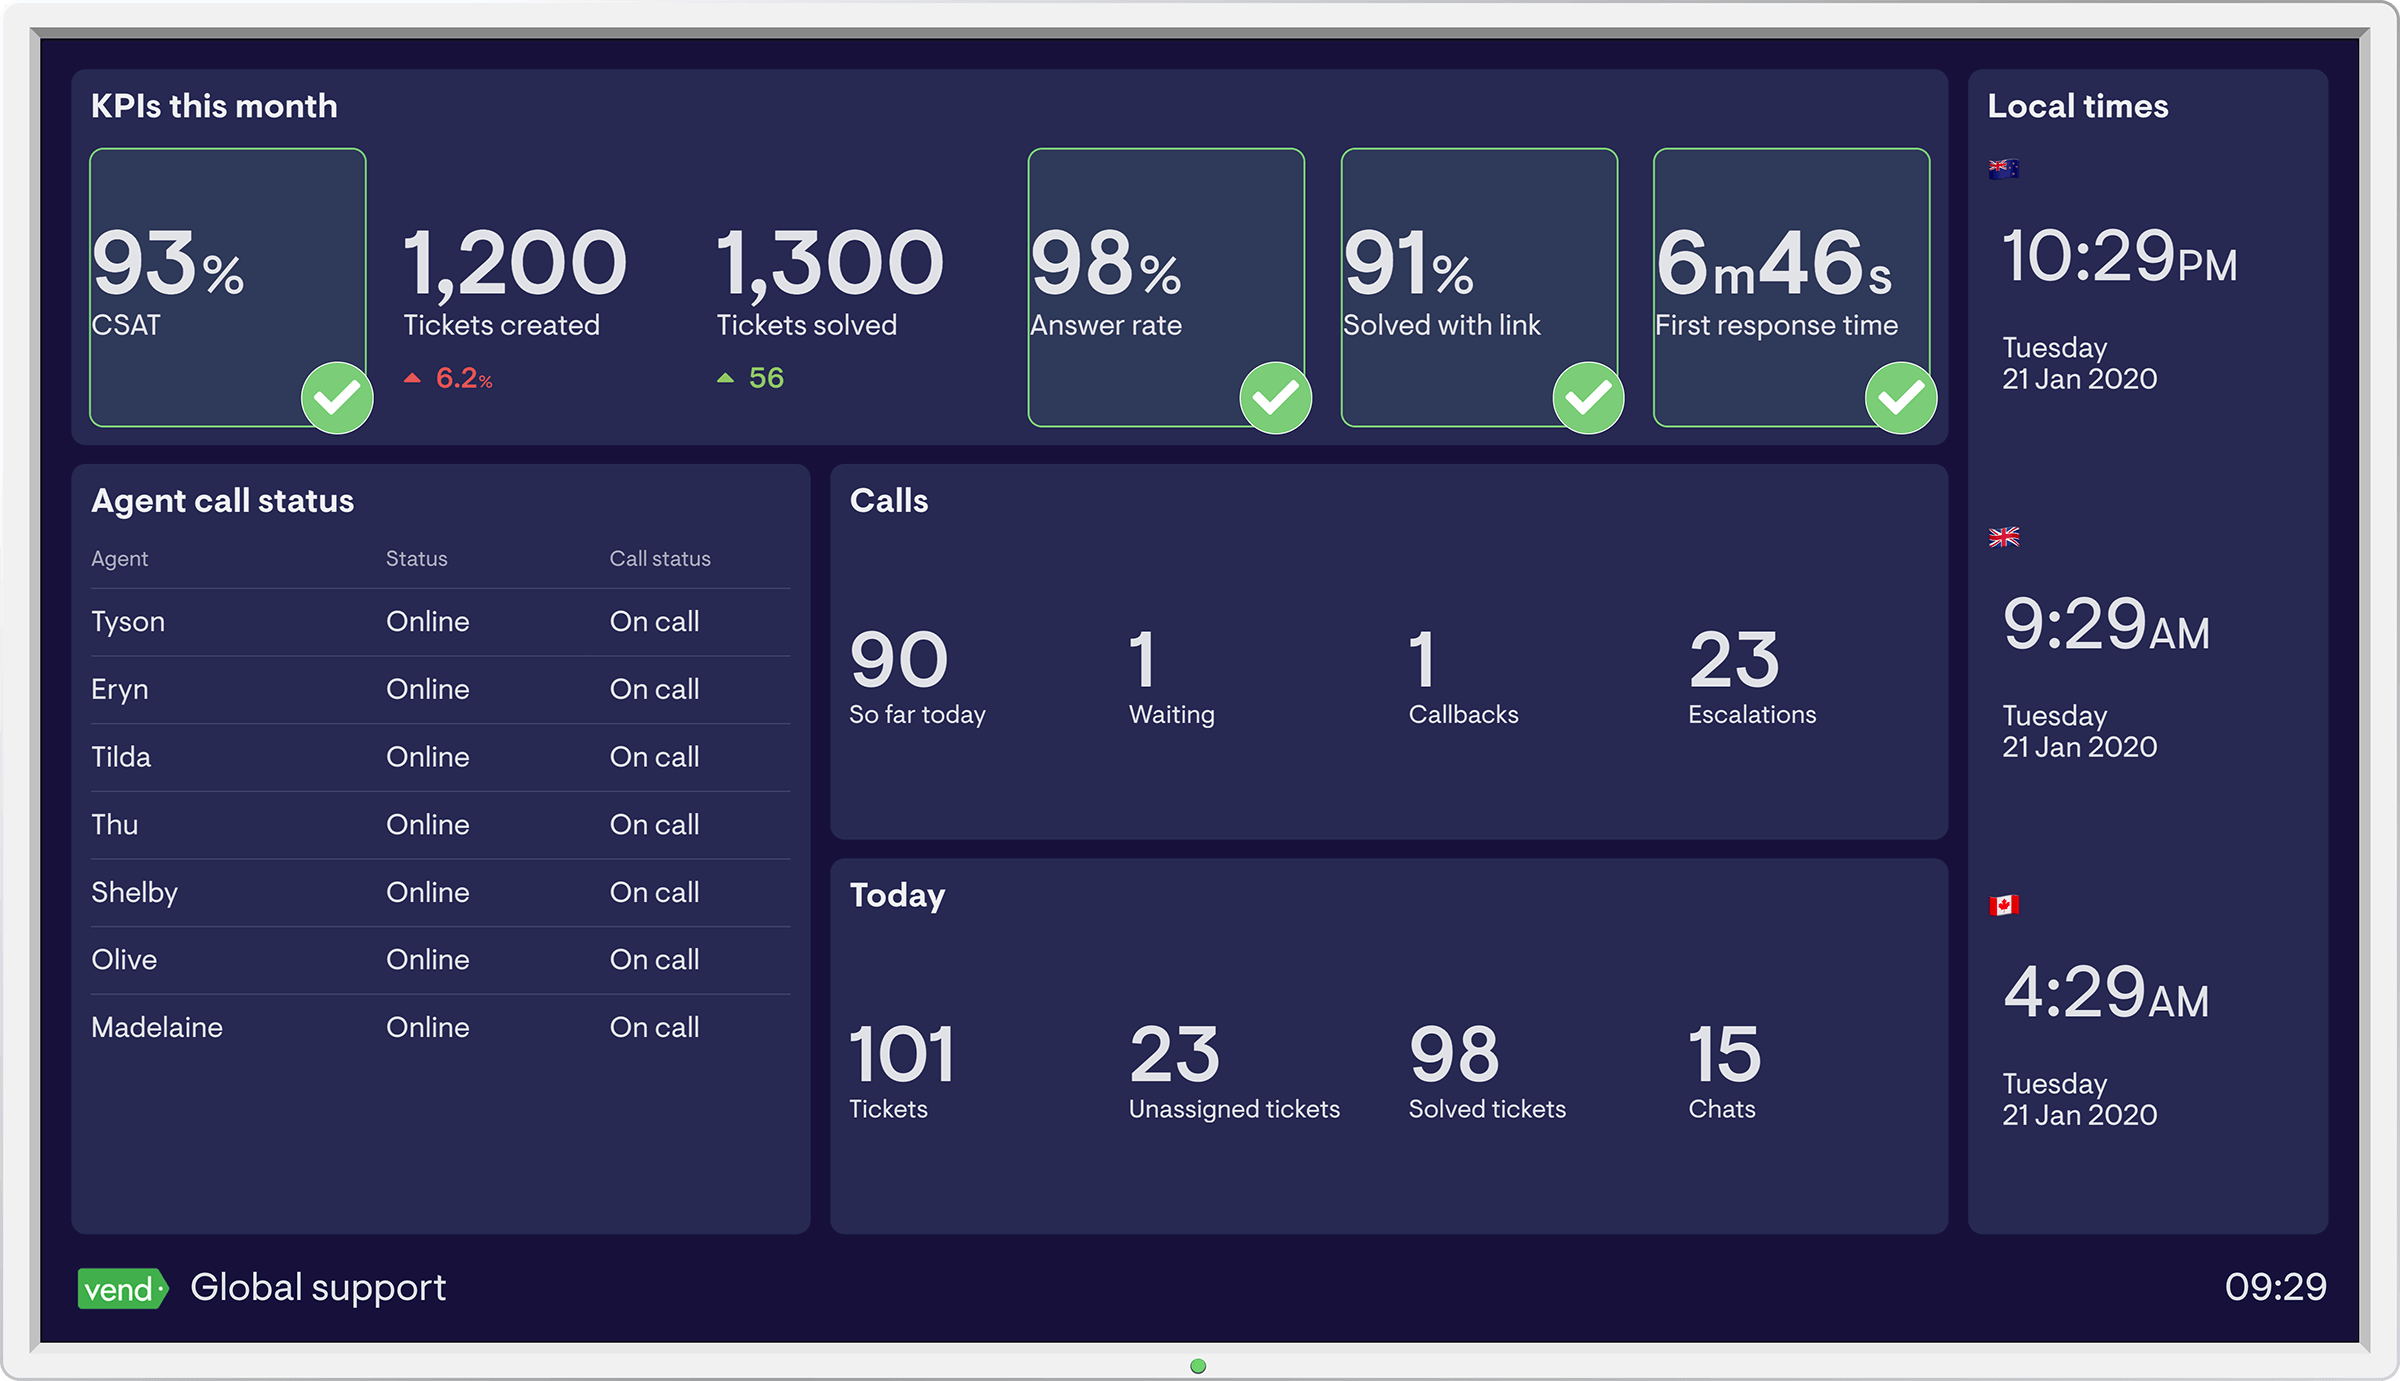 Vend's dashboard example